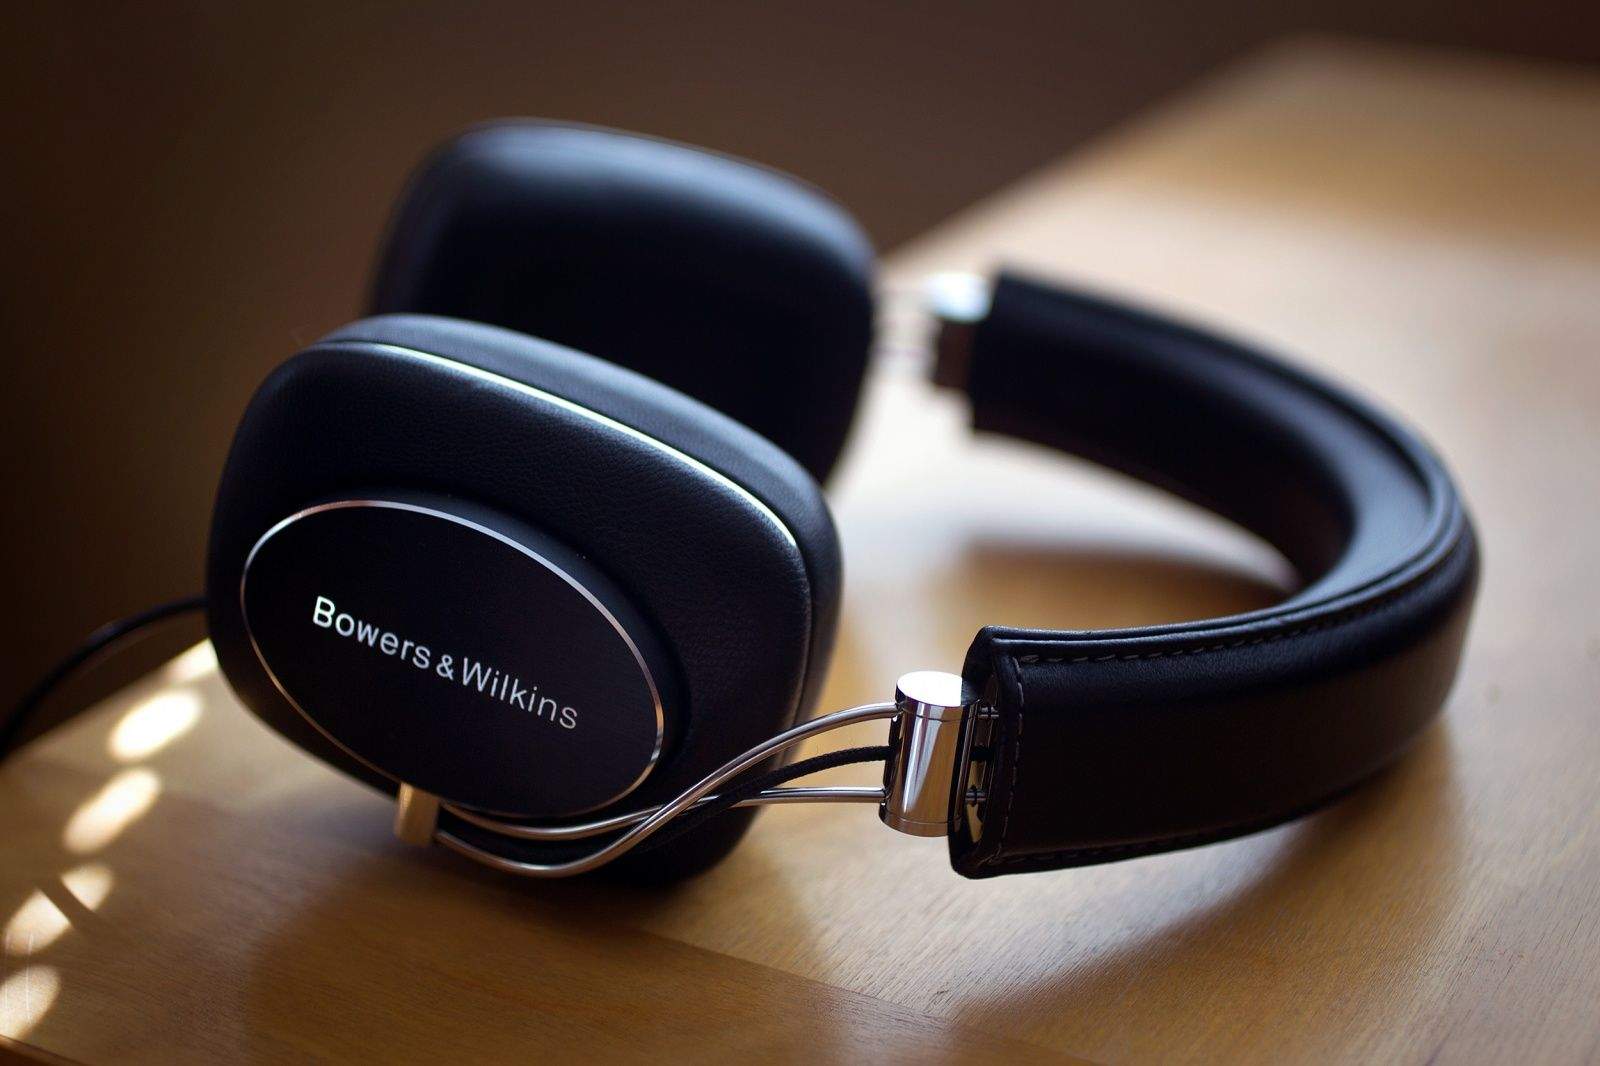 Bowers & Wilkins' P5 headphones bring a glorious audio experience.